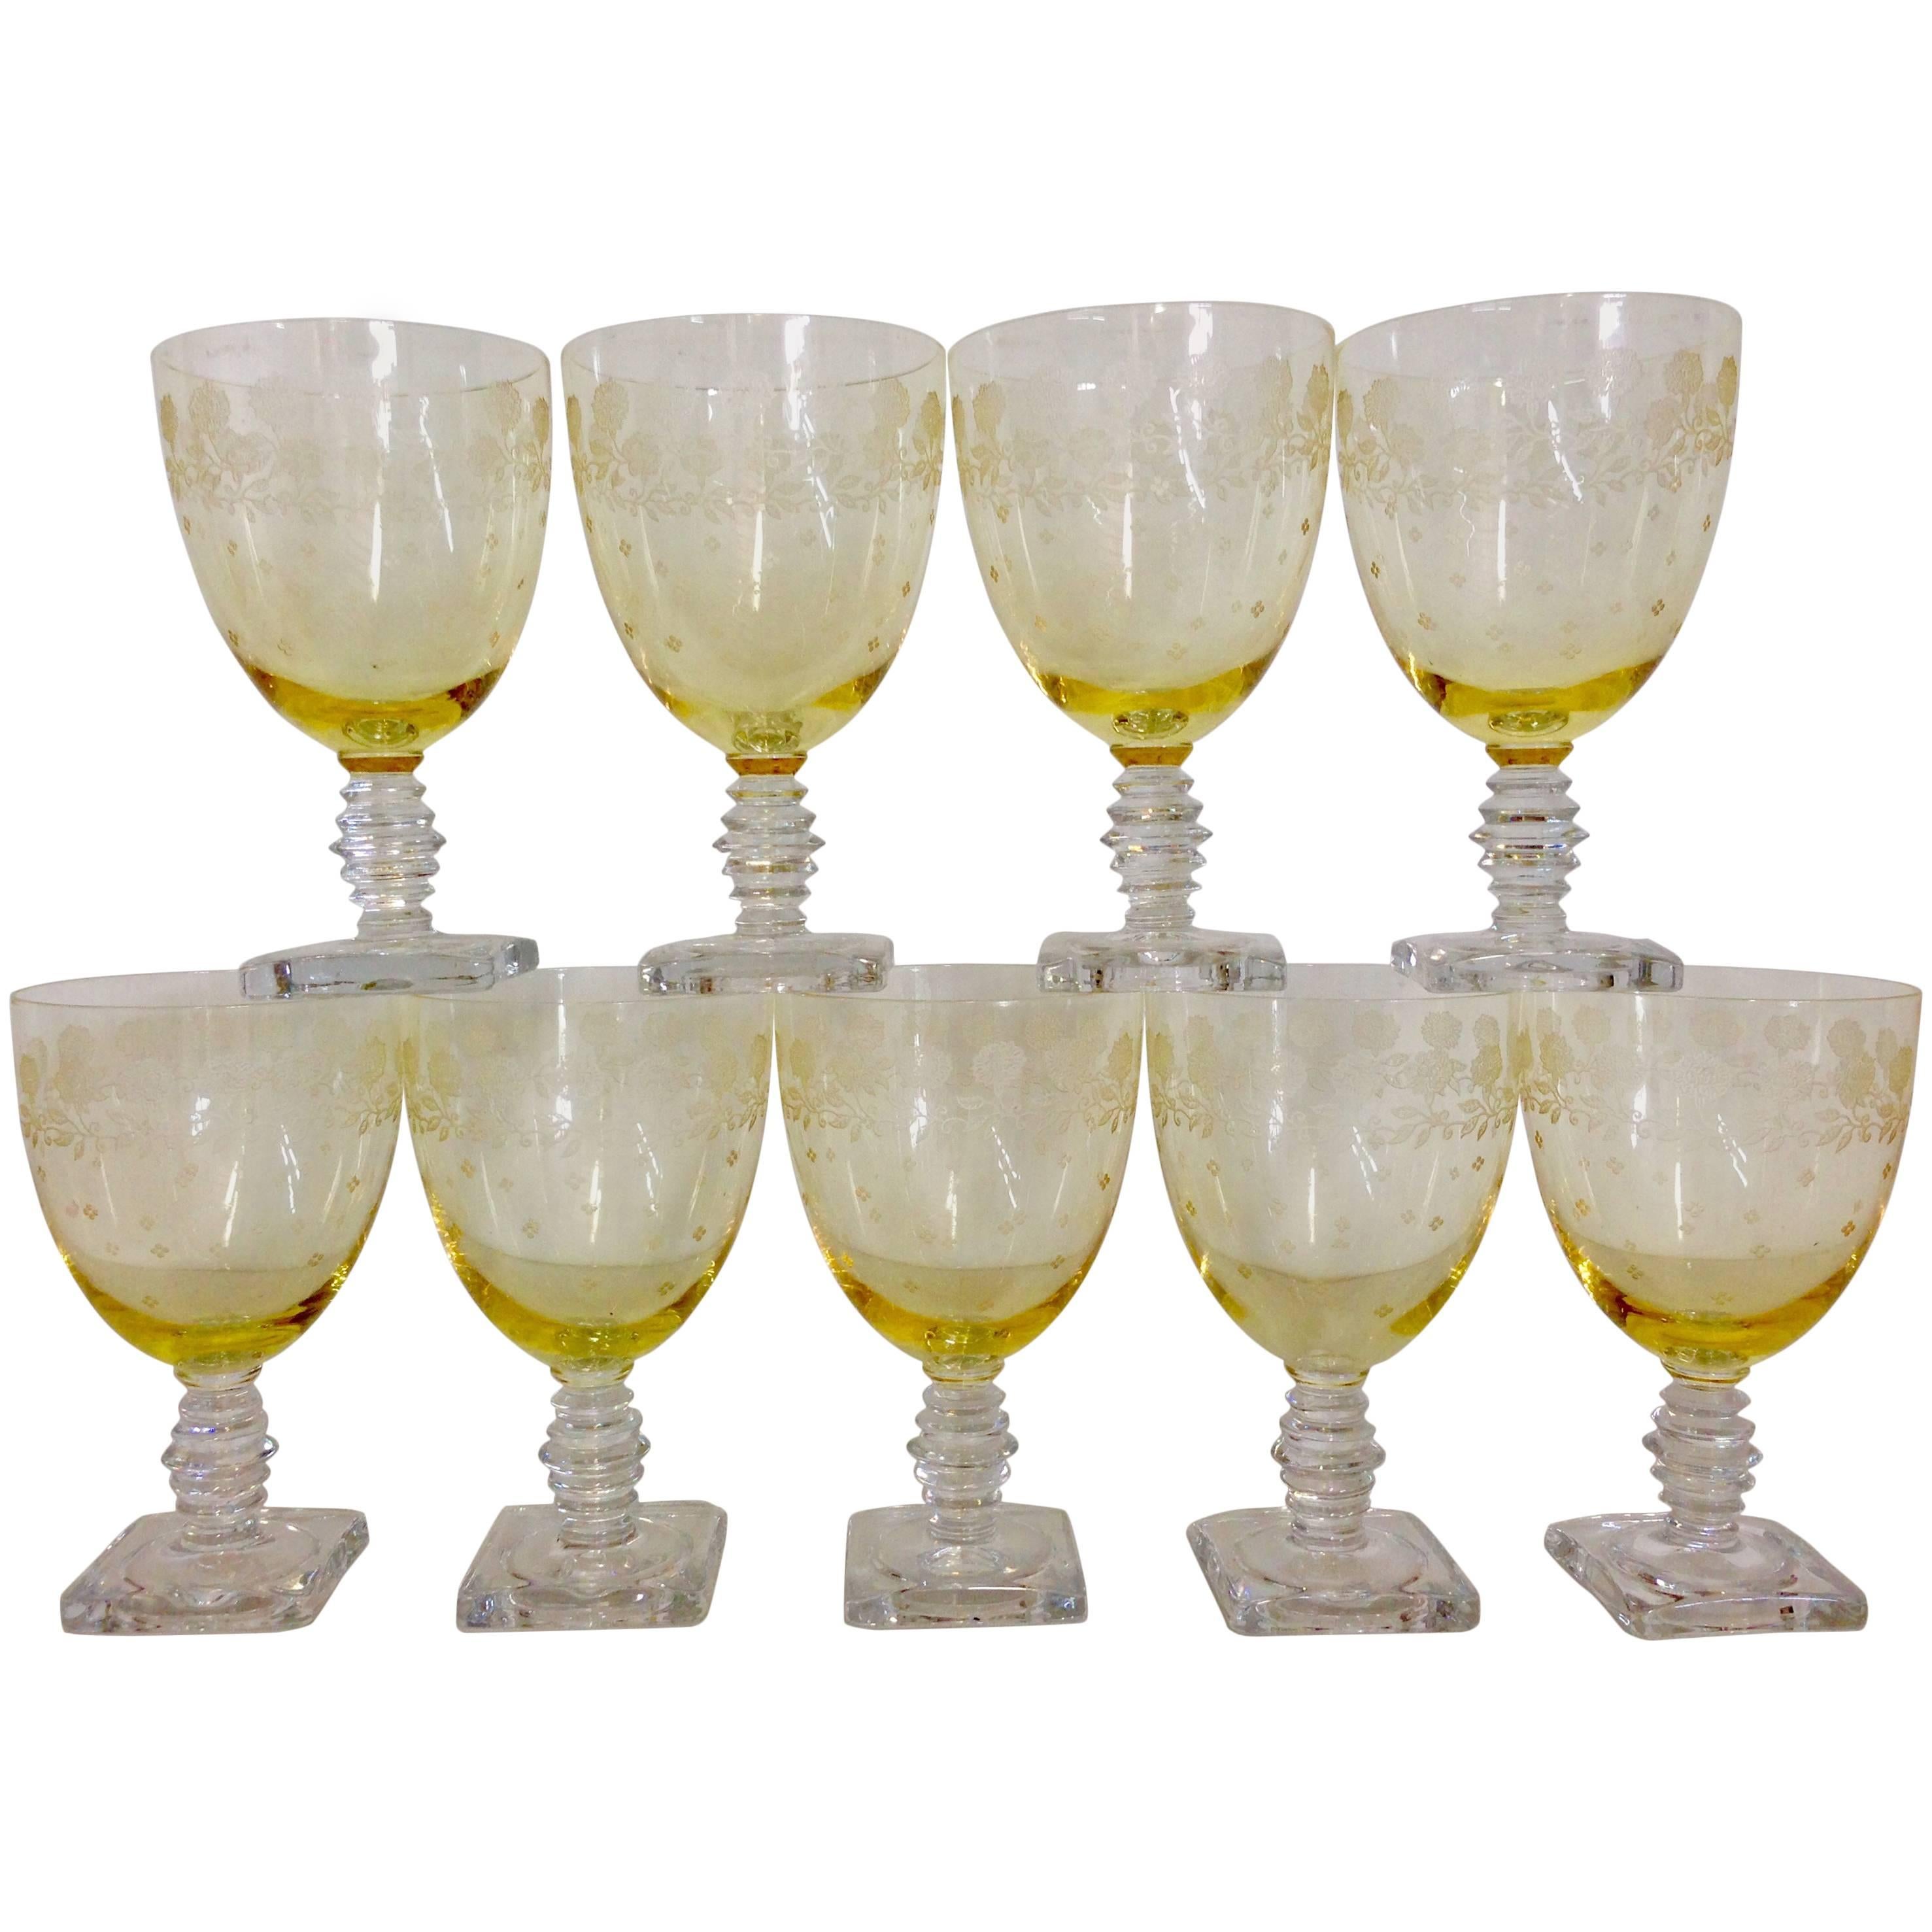 1930s Fostoria "New Garland" Etched Glass Stems/Goblets S/9